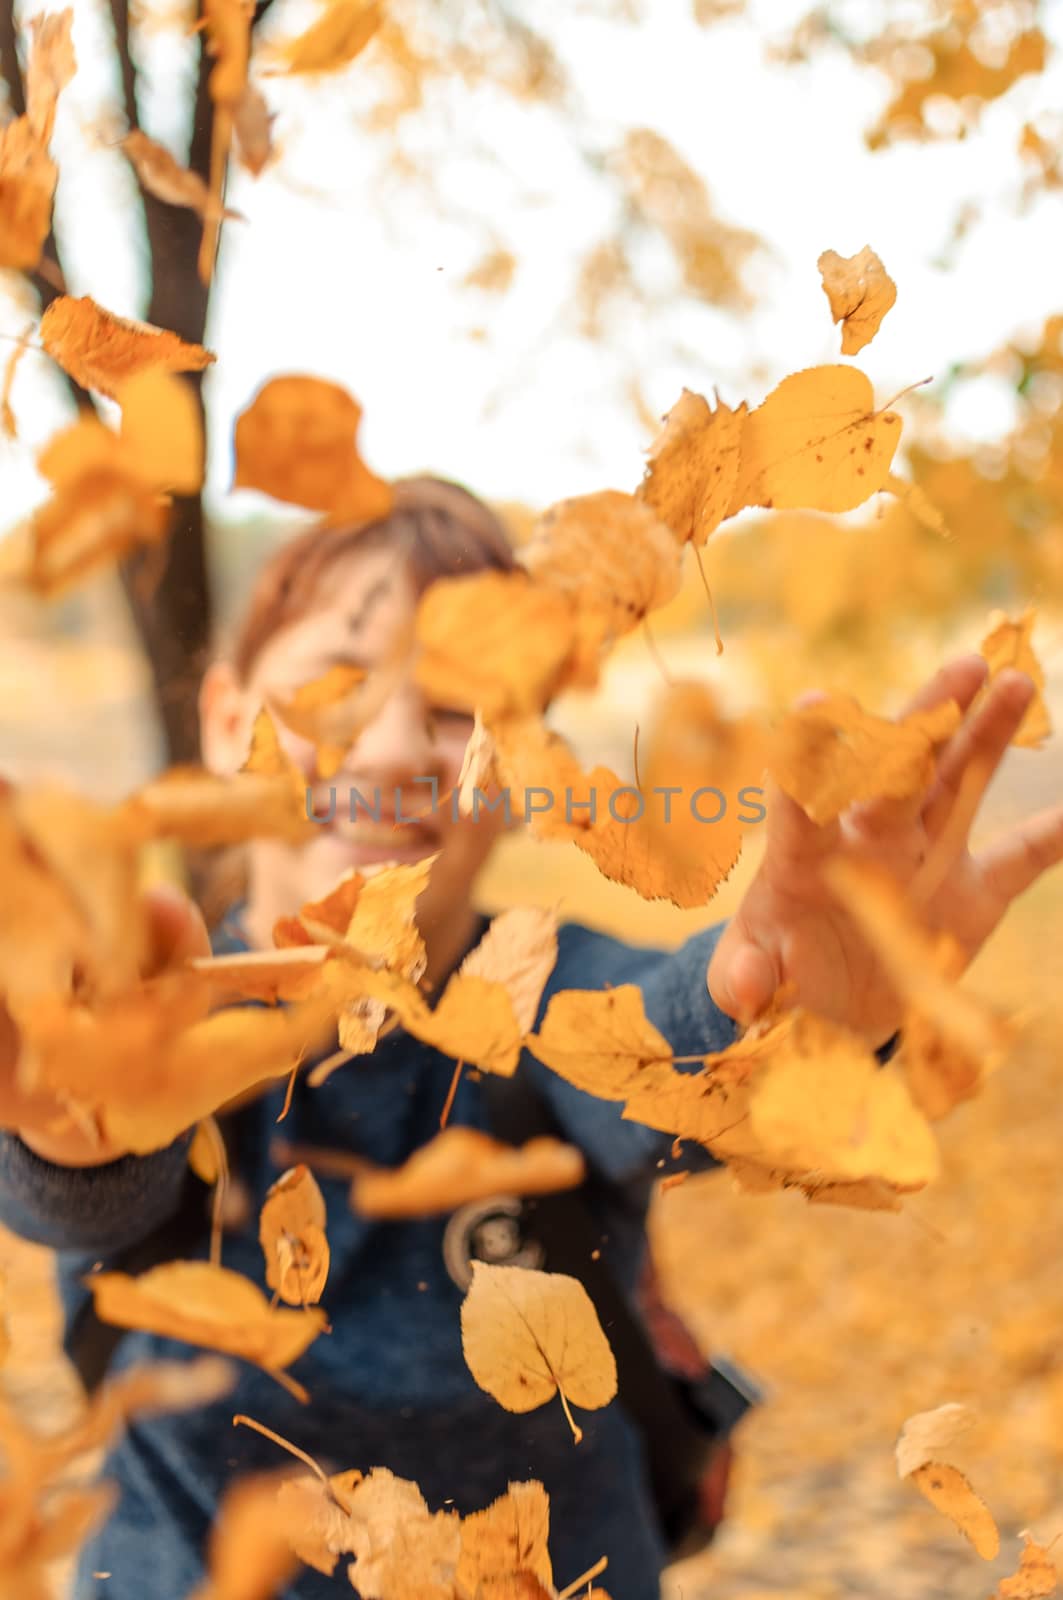 happy child playing with leaves in autumn in the forest. Girl Throwing Dry Leaves into Camera.Seasonal Outdoor Activities with Children. Capture lifestyle on a walk.